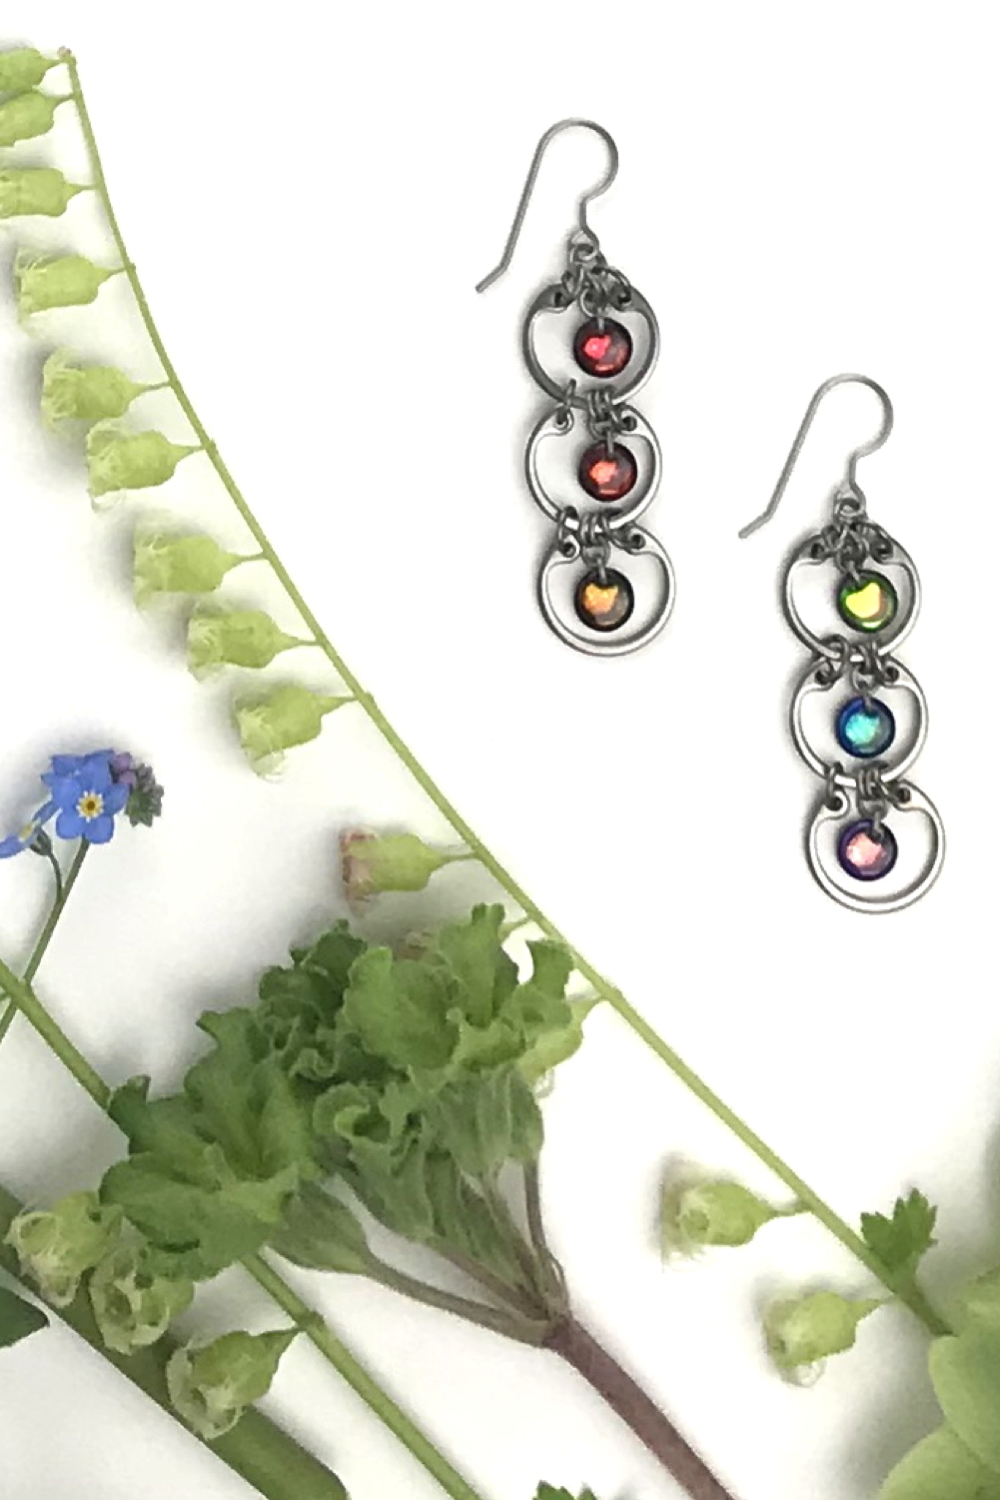 Wraptillion's modern Tripled Rainbow Earrings in a flatlay next to green fringe flowers and primroses and blue forget-me-nots.